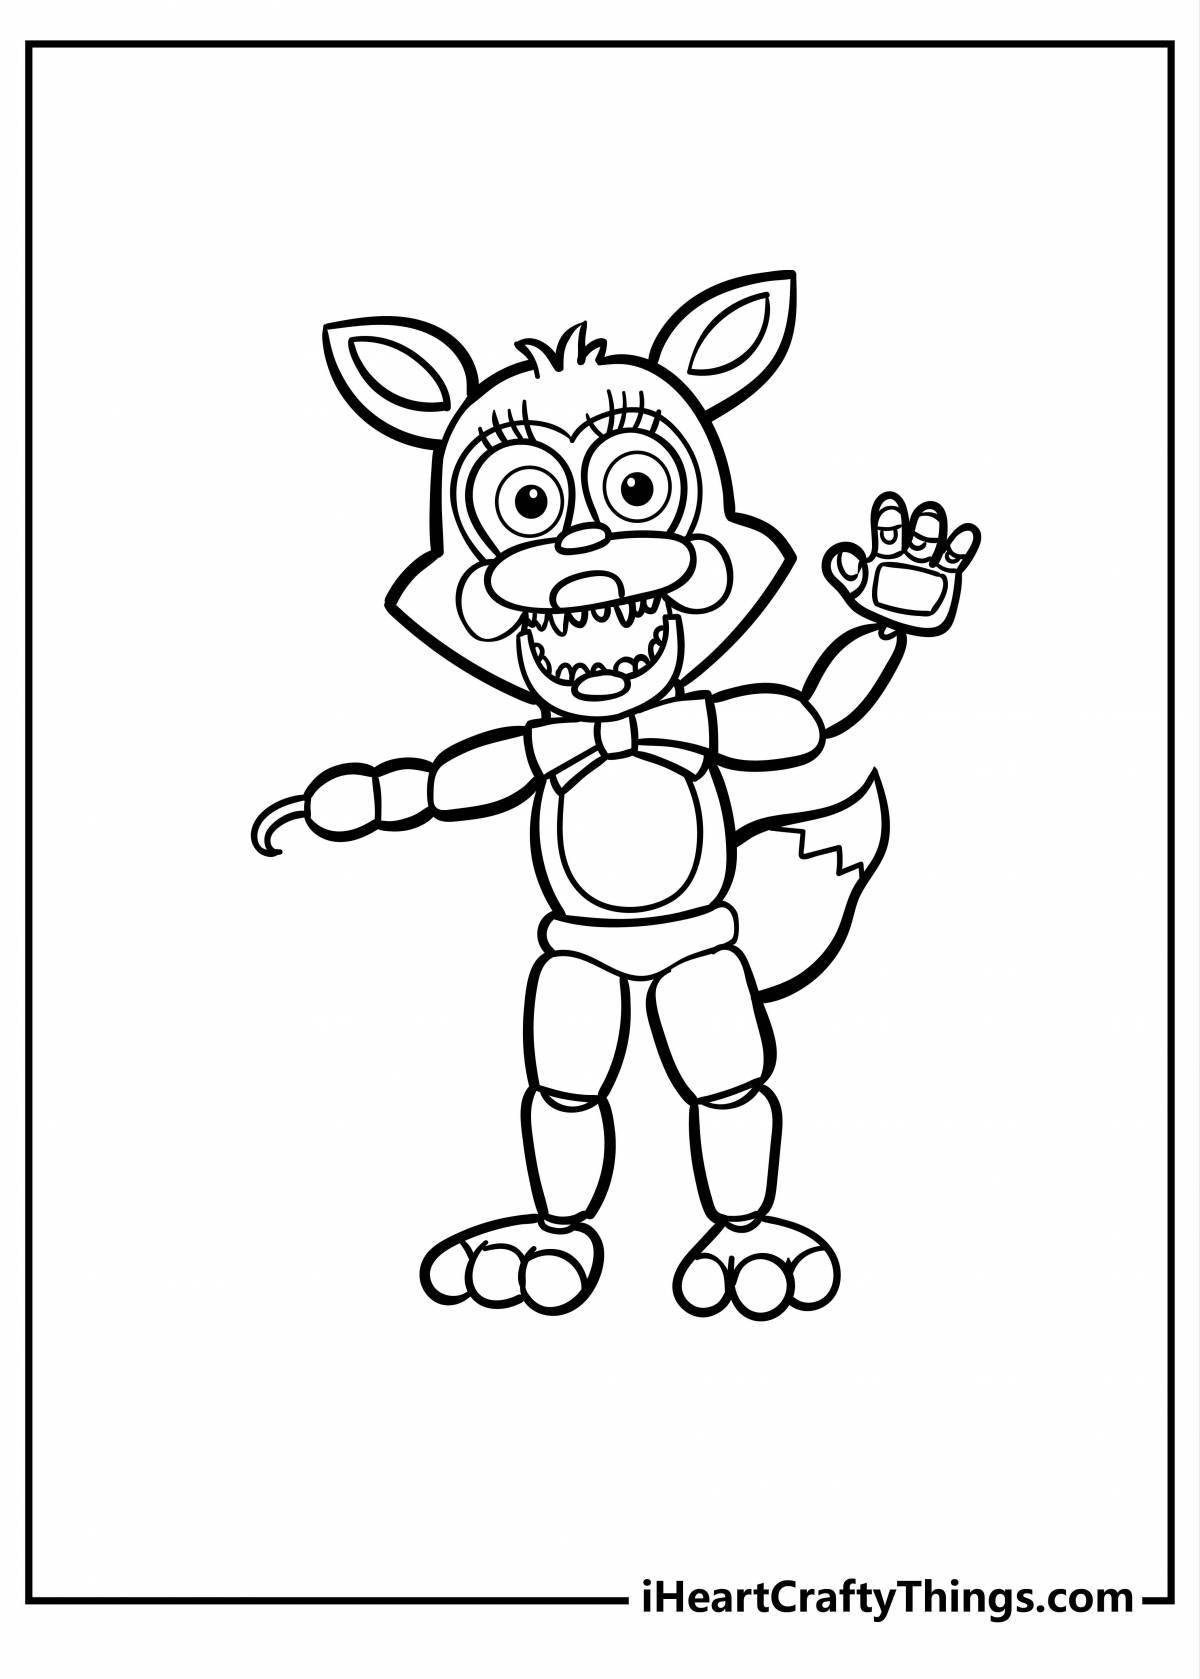 Fabulous freddy robot coloring page